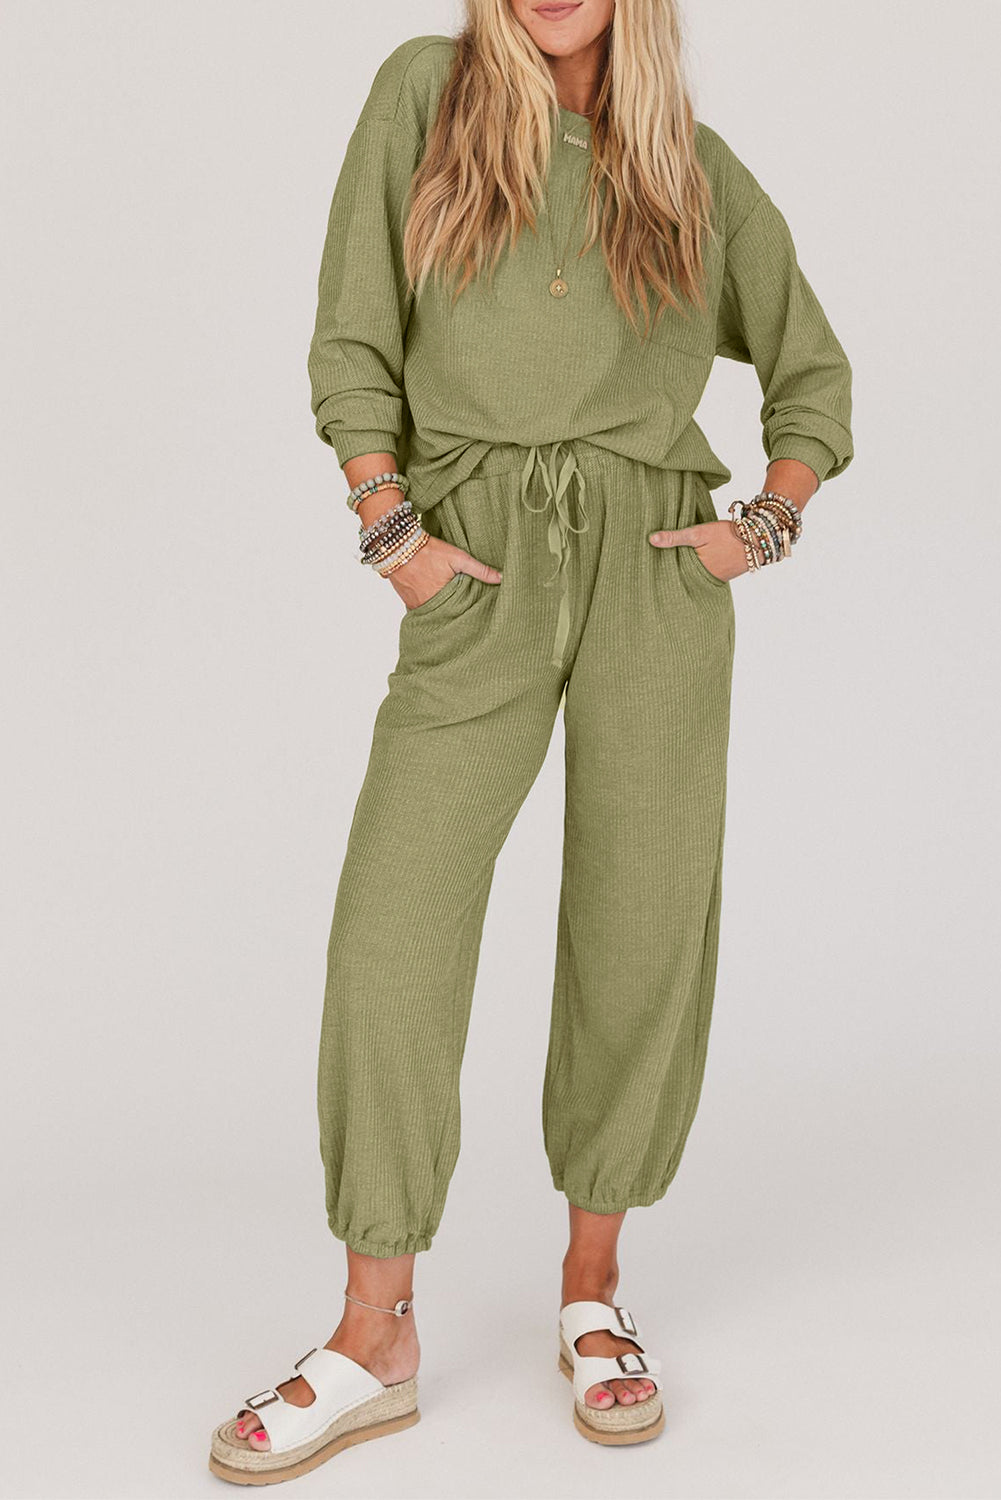 The802Gypsy  outfit sets Laurel Green / S / 65%Polyester+30%Viscose+5%Elastane TRAVELING GYPSY-Long Sleeve Top Drawstring Casual Set